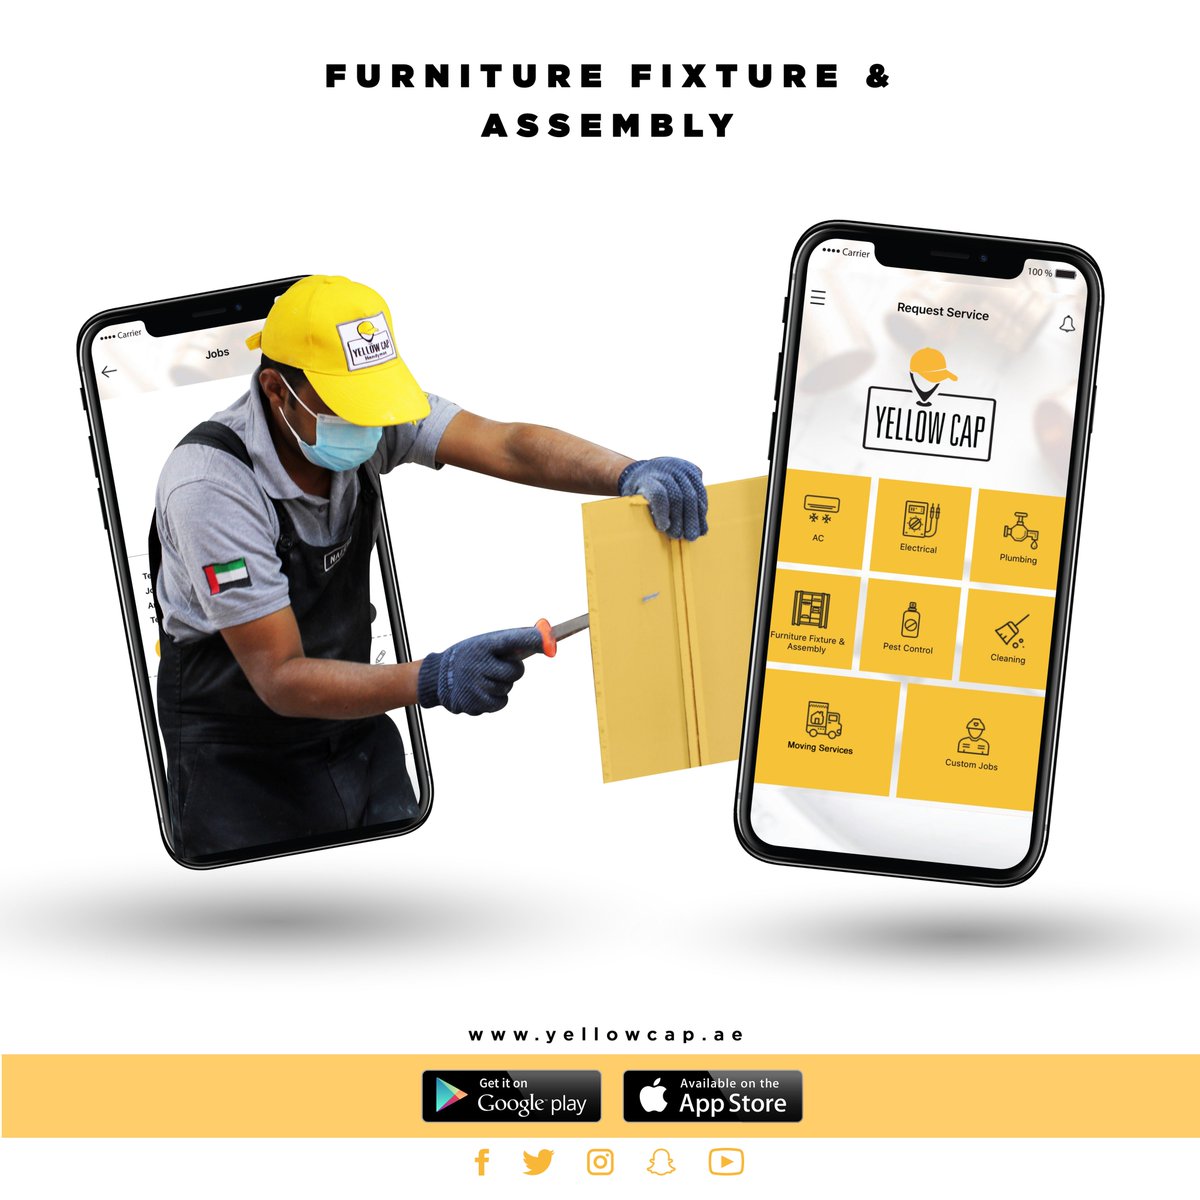 Furniture Solutions. Affordable Prices. Book your service with Yellow Cap now! #download #mobileapplication #yellowcap #applestore #googleplay #appleevent #apple #android #furniturefixing #furnitureassembly #abudhabi #inabudhabi #uae #simpleabudhabi #accessible